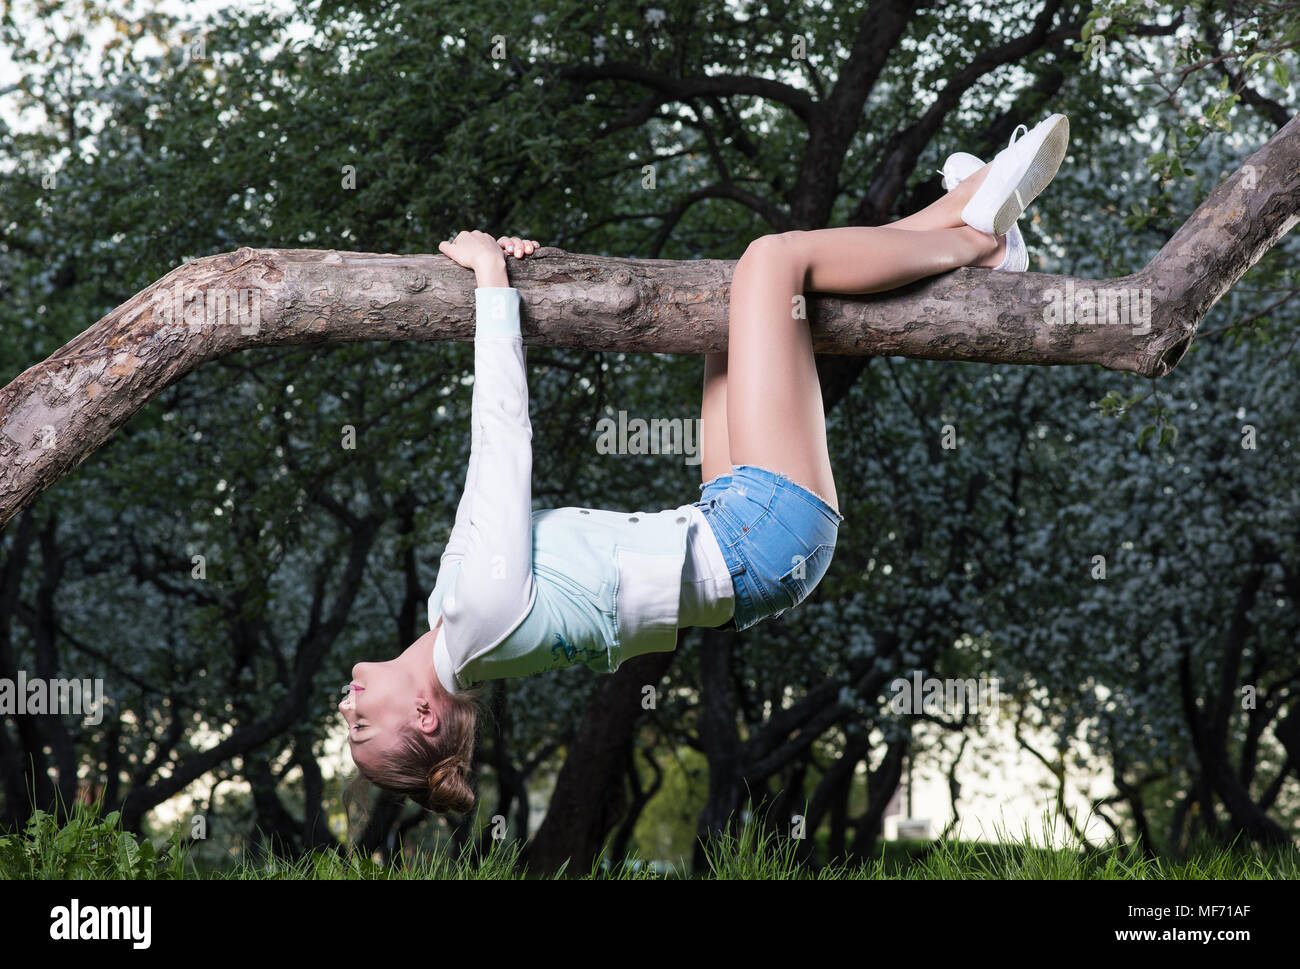 Young woman hanging upside down on tree branch. Blossoming trees in the background Stock Photo